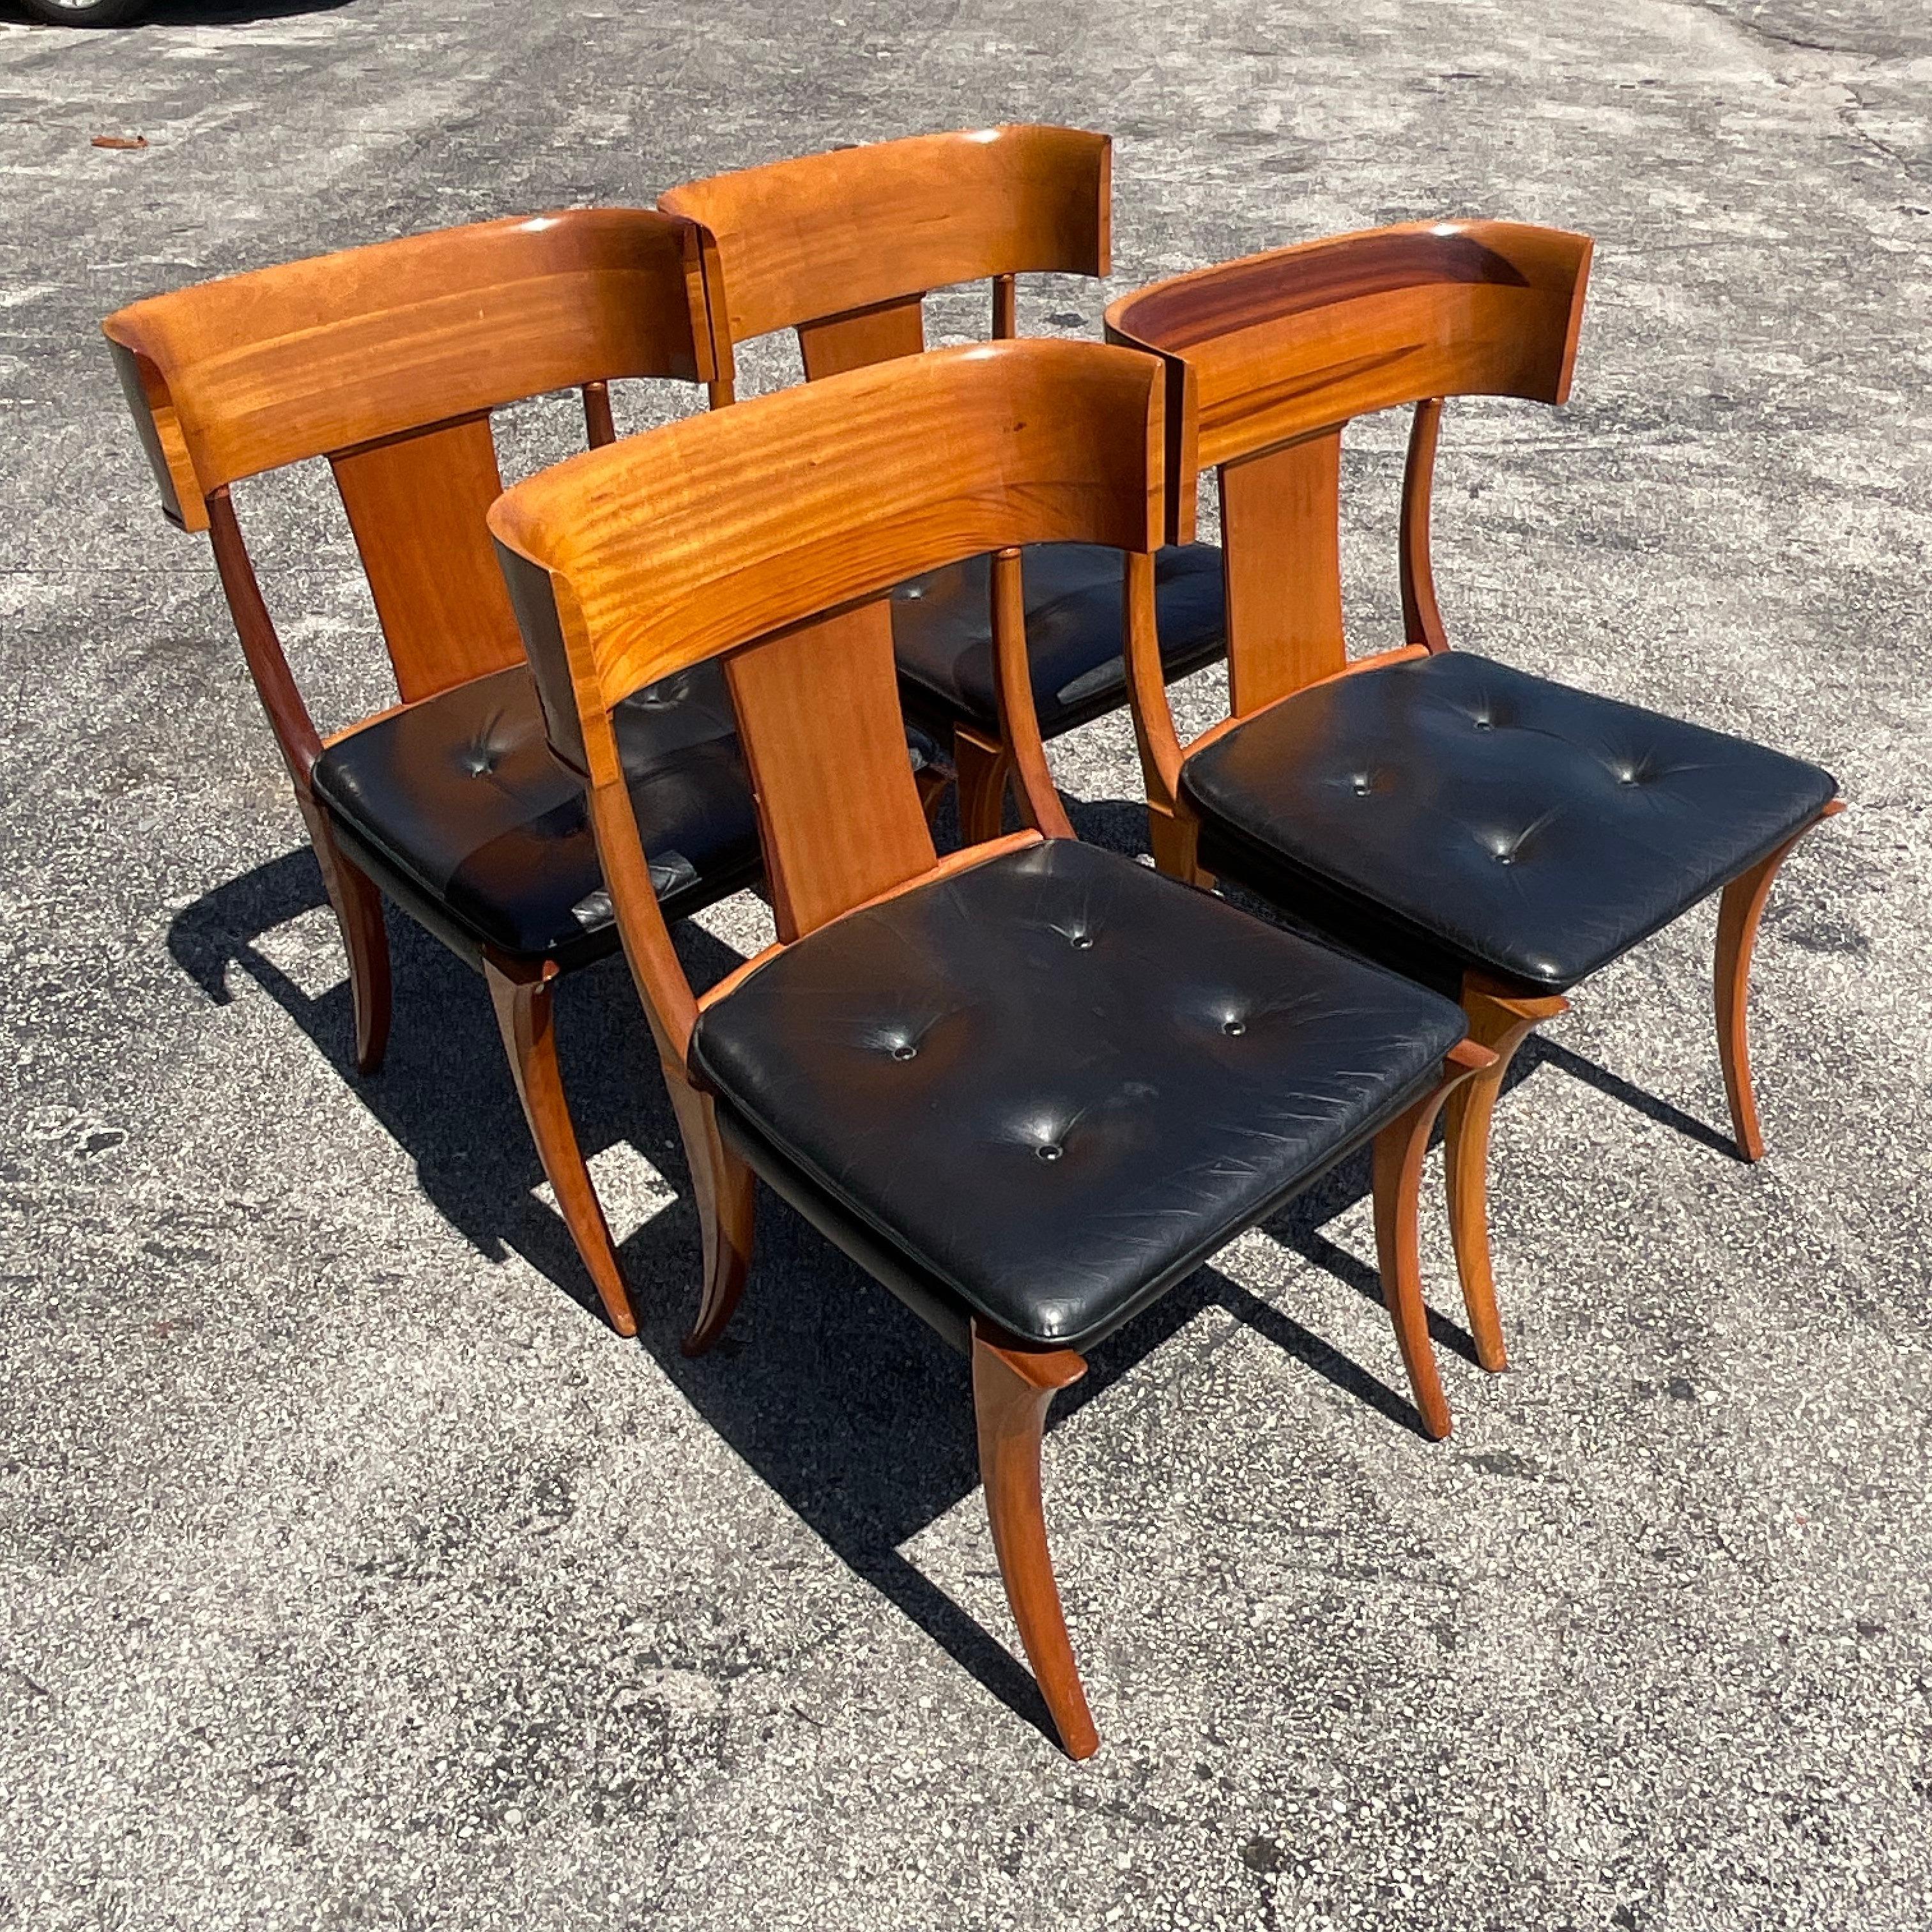 Vintage Neoclassical Klismos Dining Chairs After Kipp Stuart - Set of 4 For Sale 4